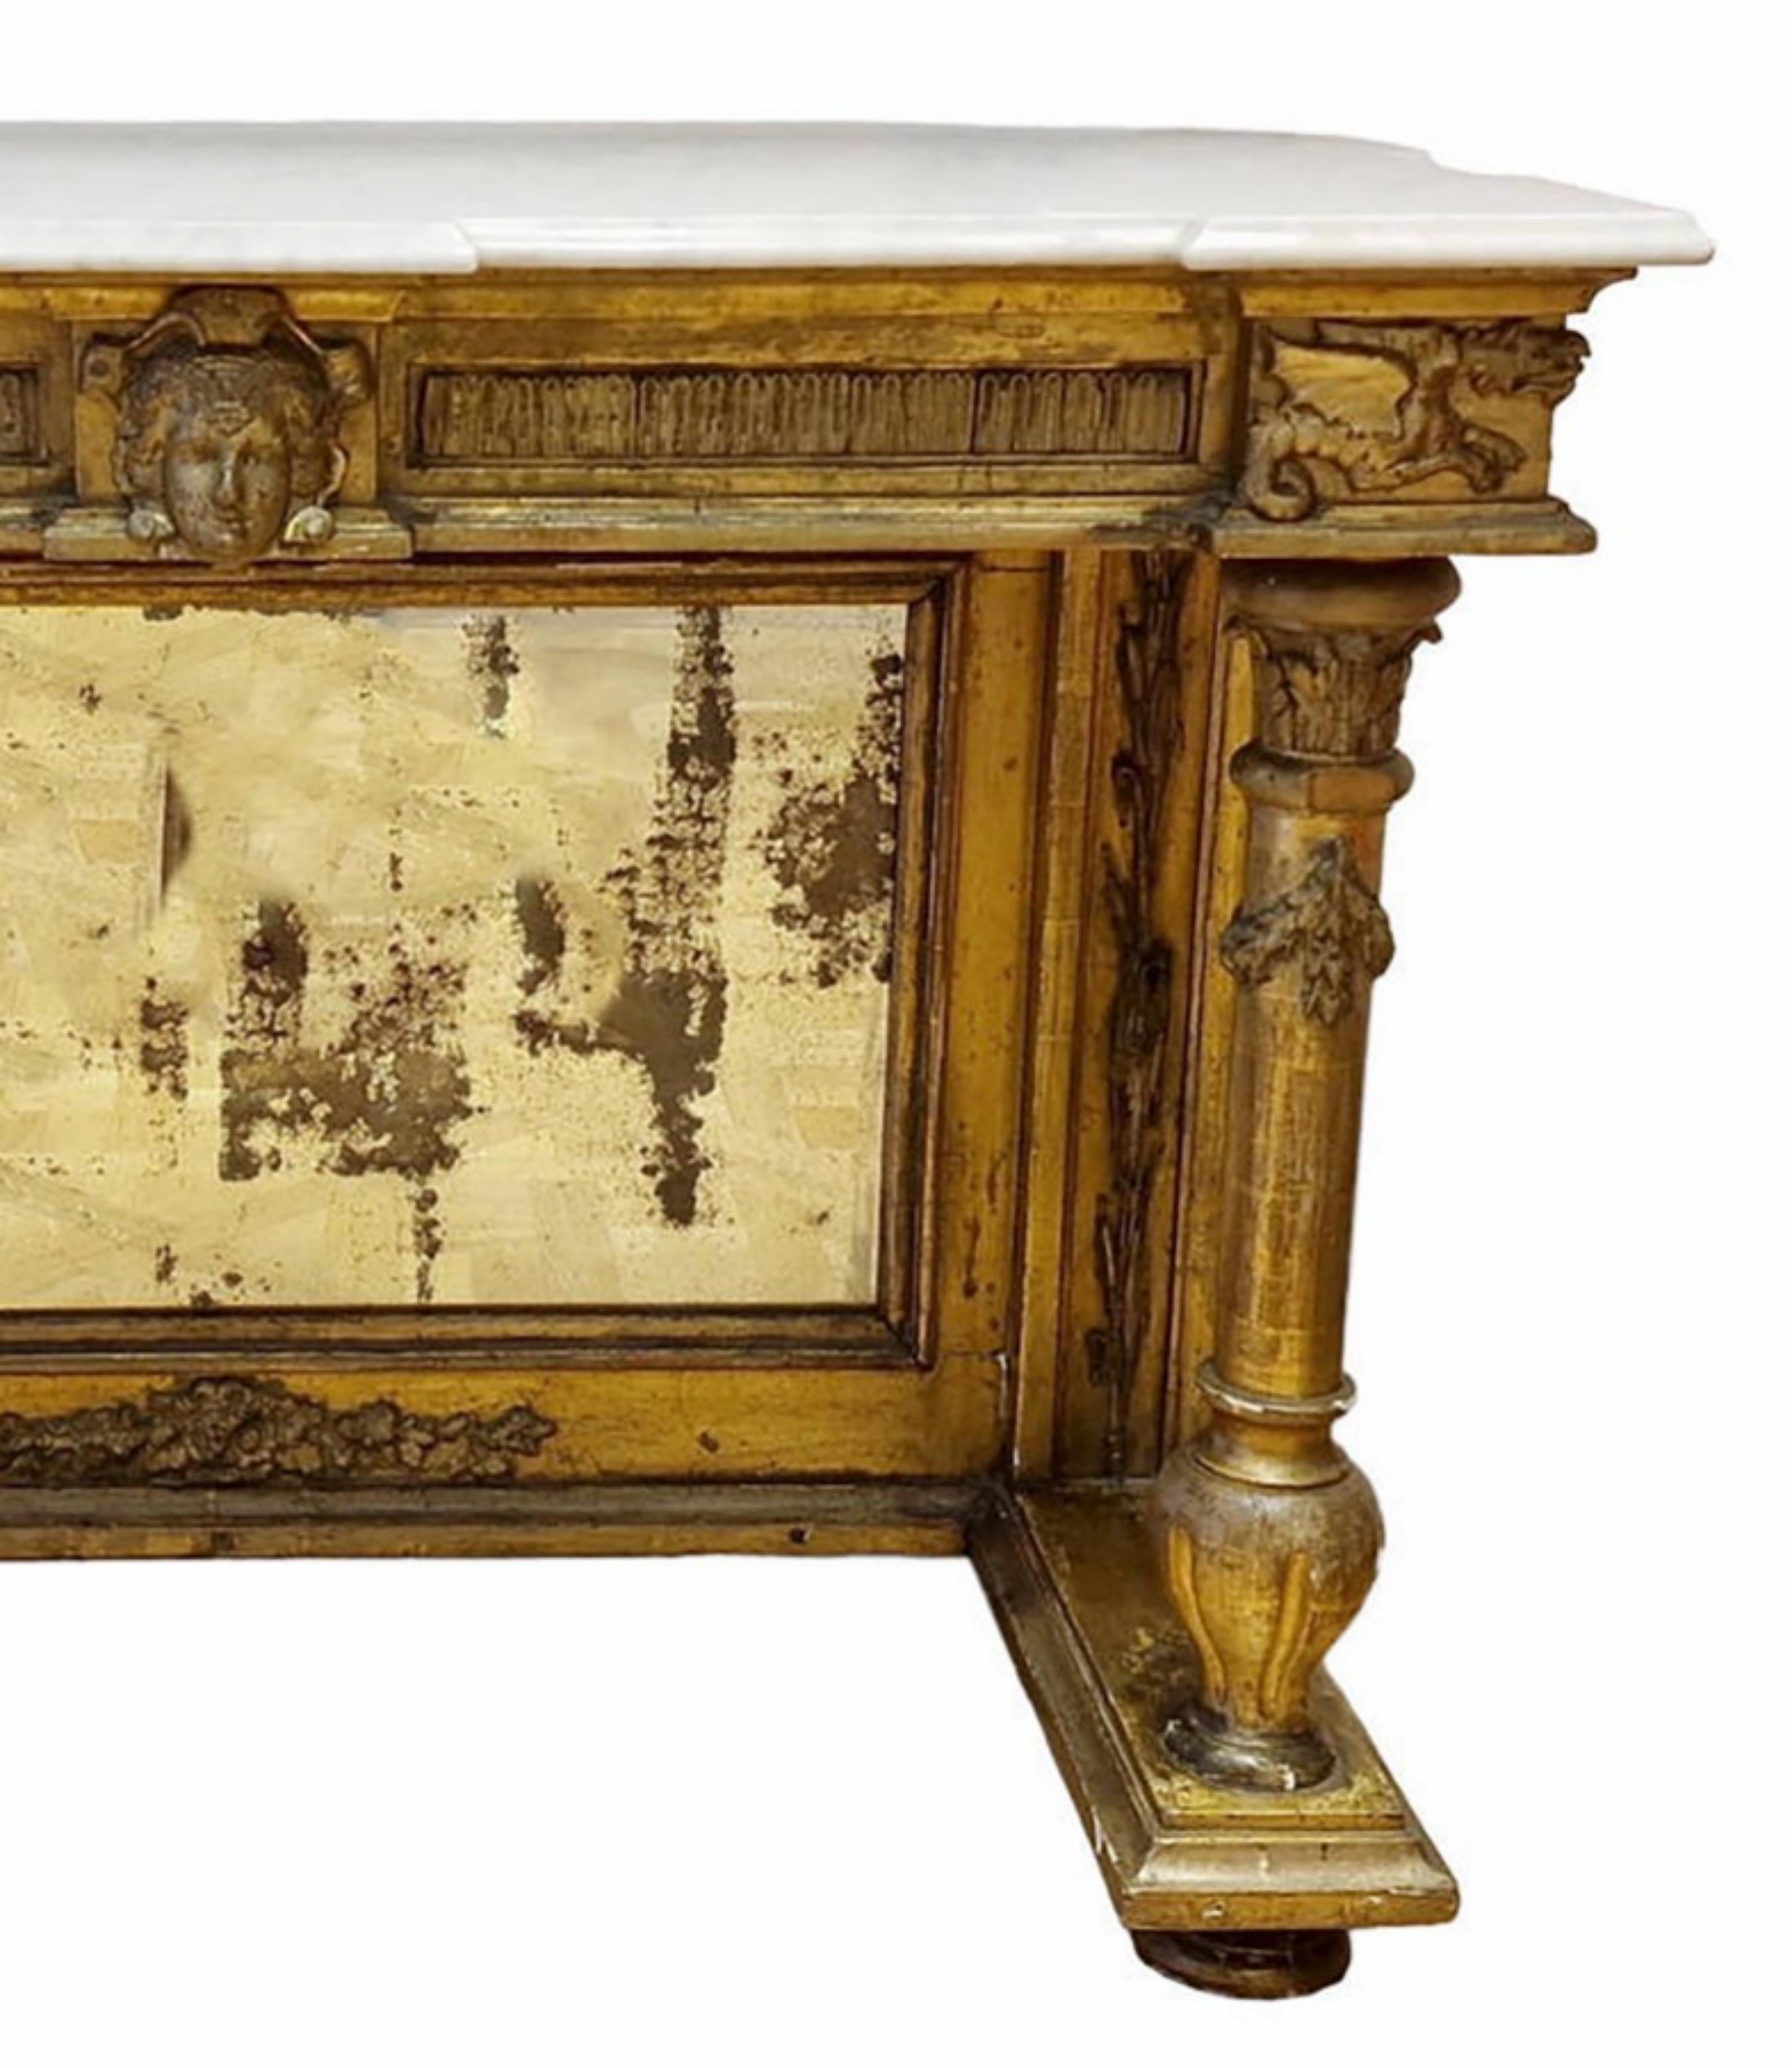 Amazing 19th CENTURY Important Console Empire Napoleon III
In gilded wood carved with dragons and a mascaron head, resting on two columns at the front and a large vertical spacer holding a mirror at the back. 
Topped with a white Carrara marble